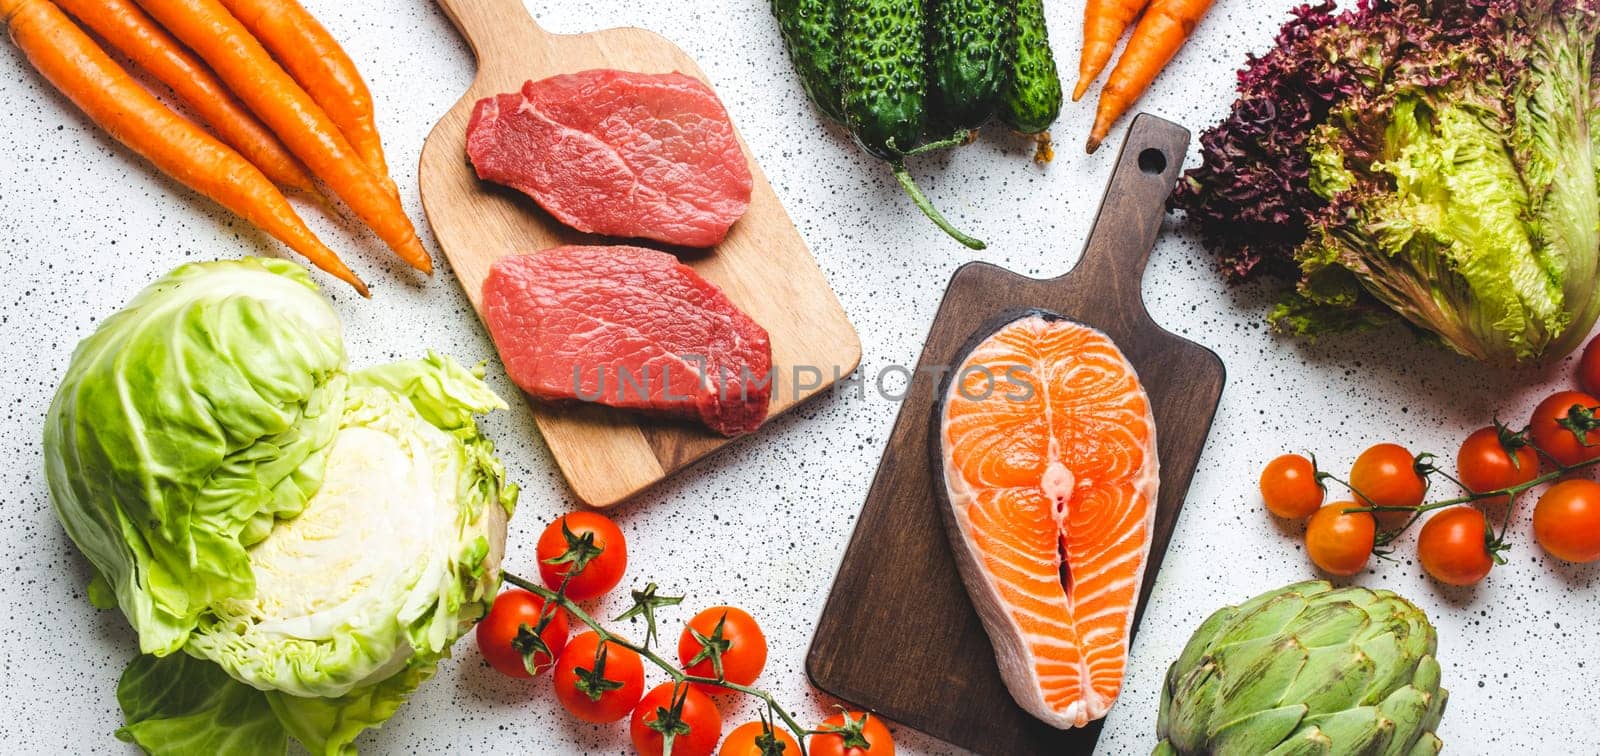 Assorted food raw products: vegetables, beef meat steak, fish salmon fillet on wooden cutting boards, white rustic table top view. Healthy food ingredients background, diet and balanced nutrition